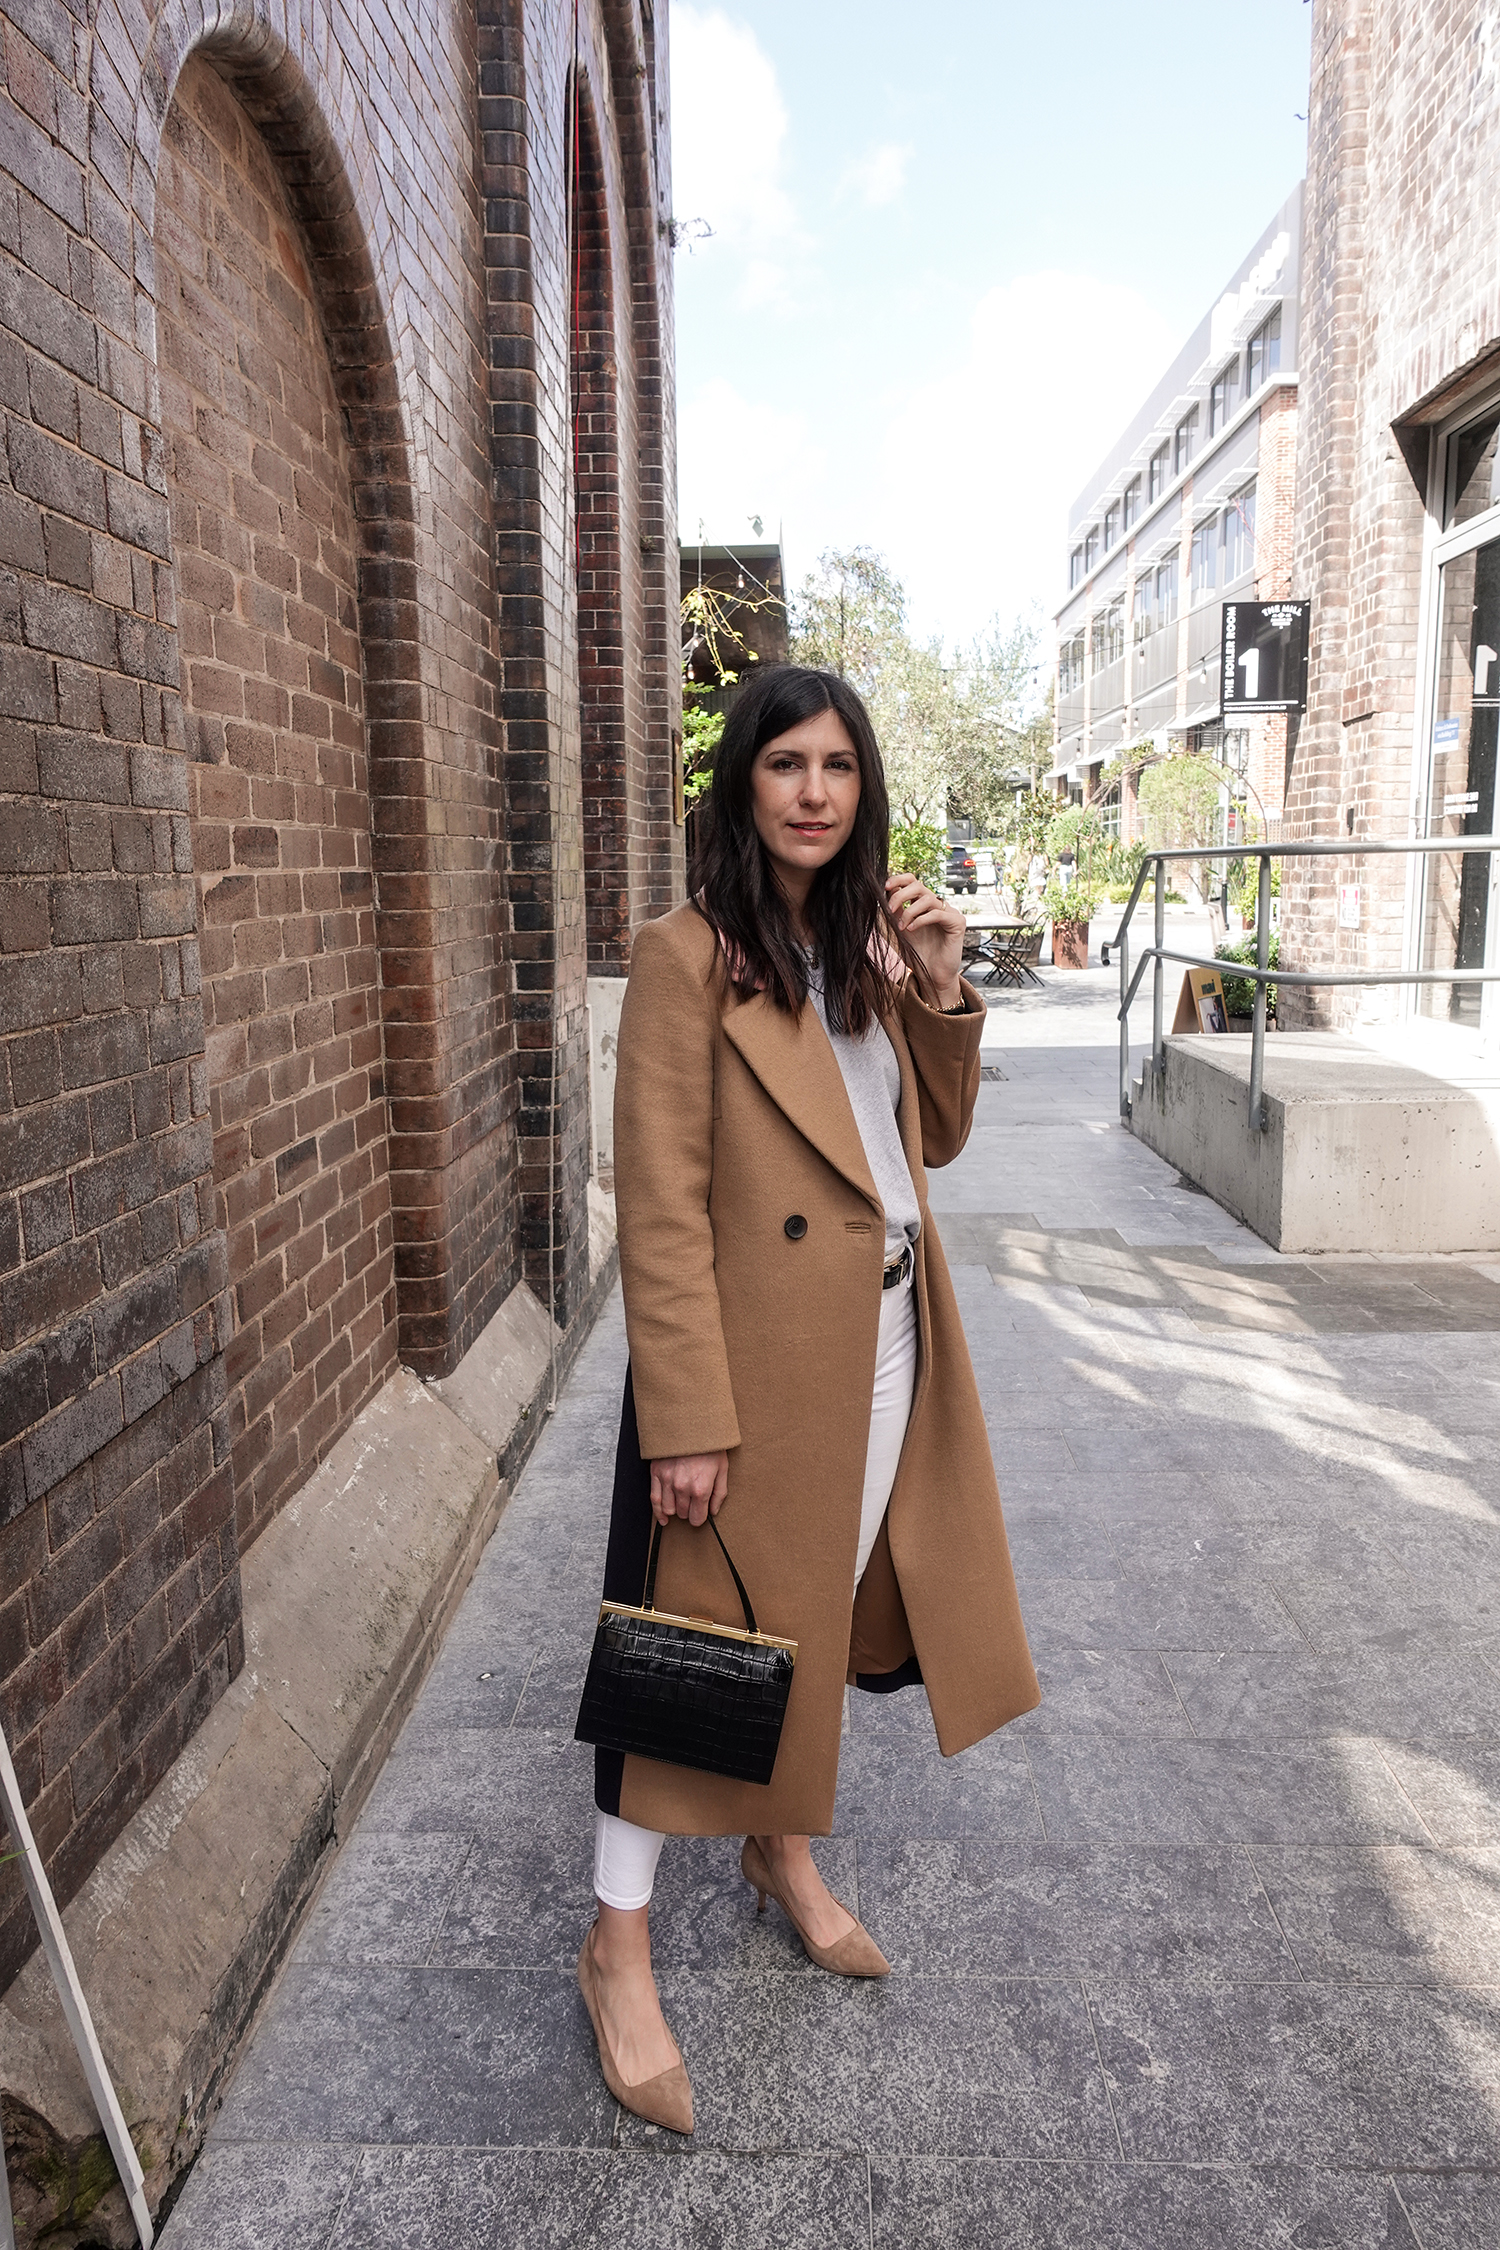 Neutral outfit in a minimal style wearing a camel coat and white jeans